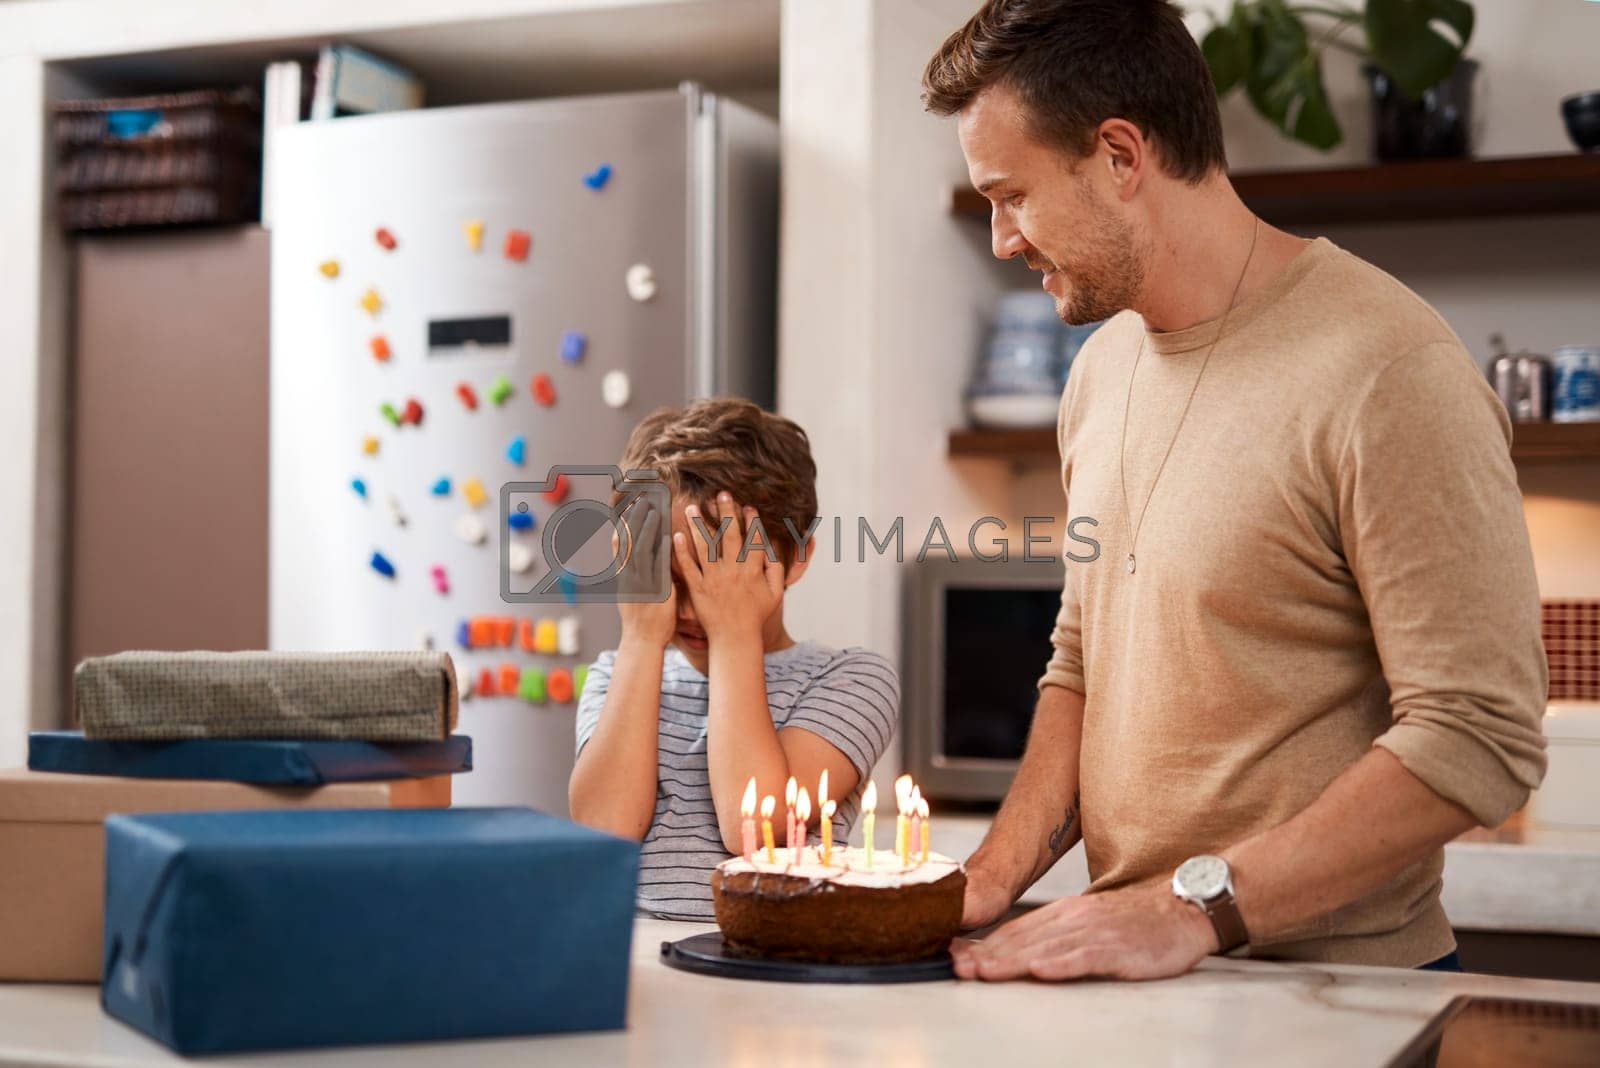 Royalty free image of Go ahead and open your eyes now. a man surprising his son with cake and gifts on his birthday. by YuriArcurs